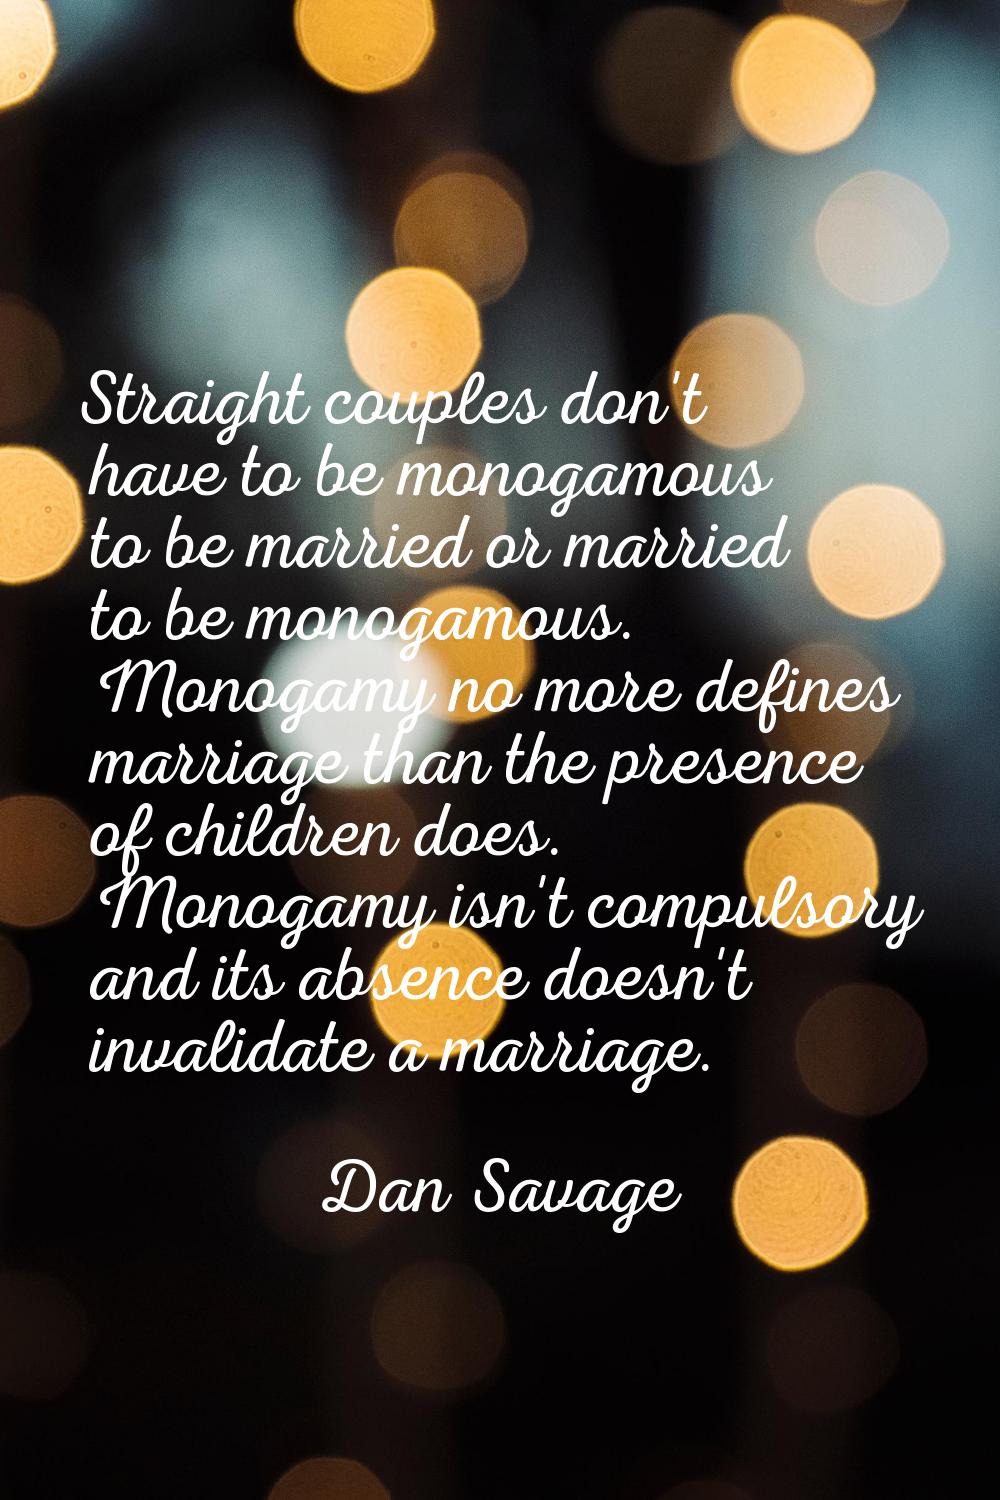 Straight couples don't have to be monogamous to be married or married to be monogamous. Monogamy no